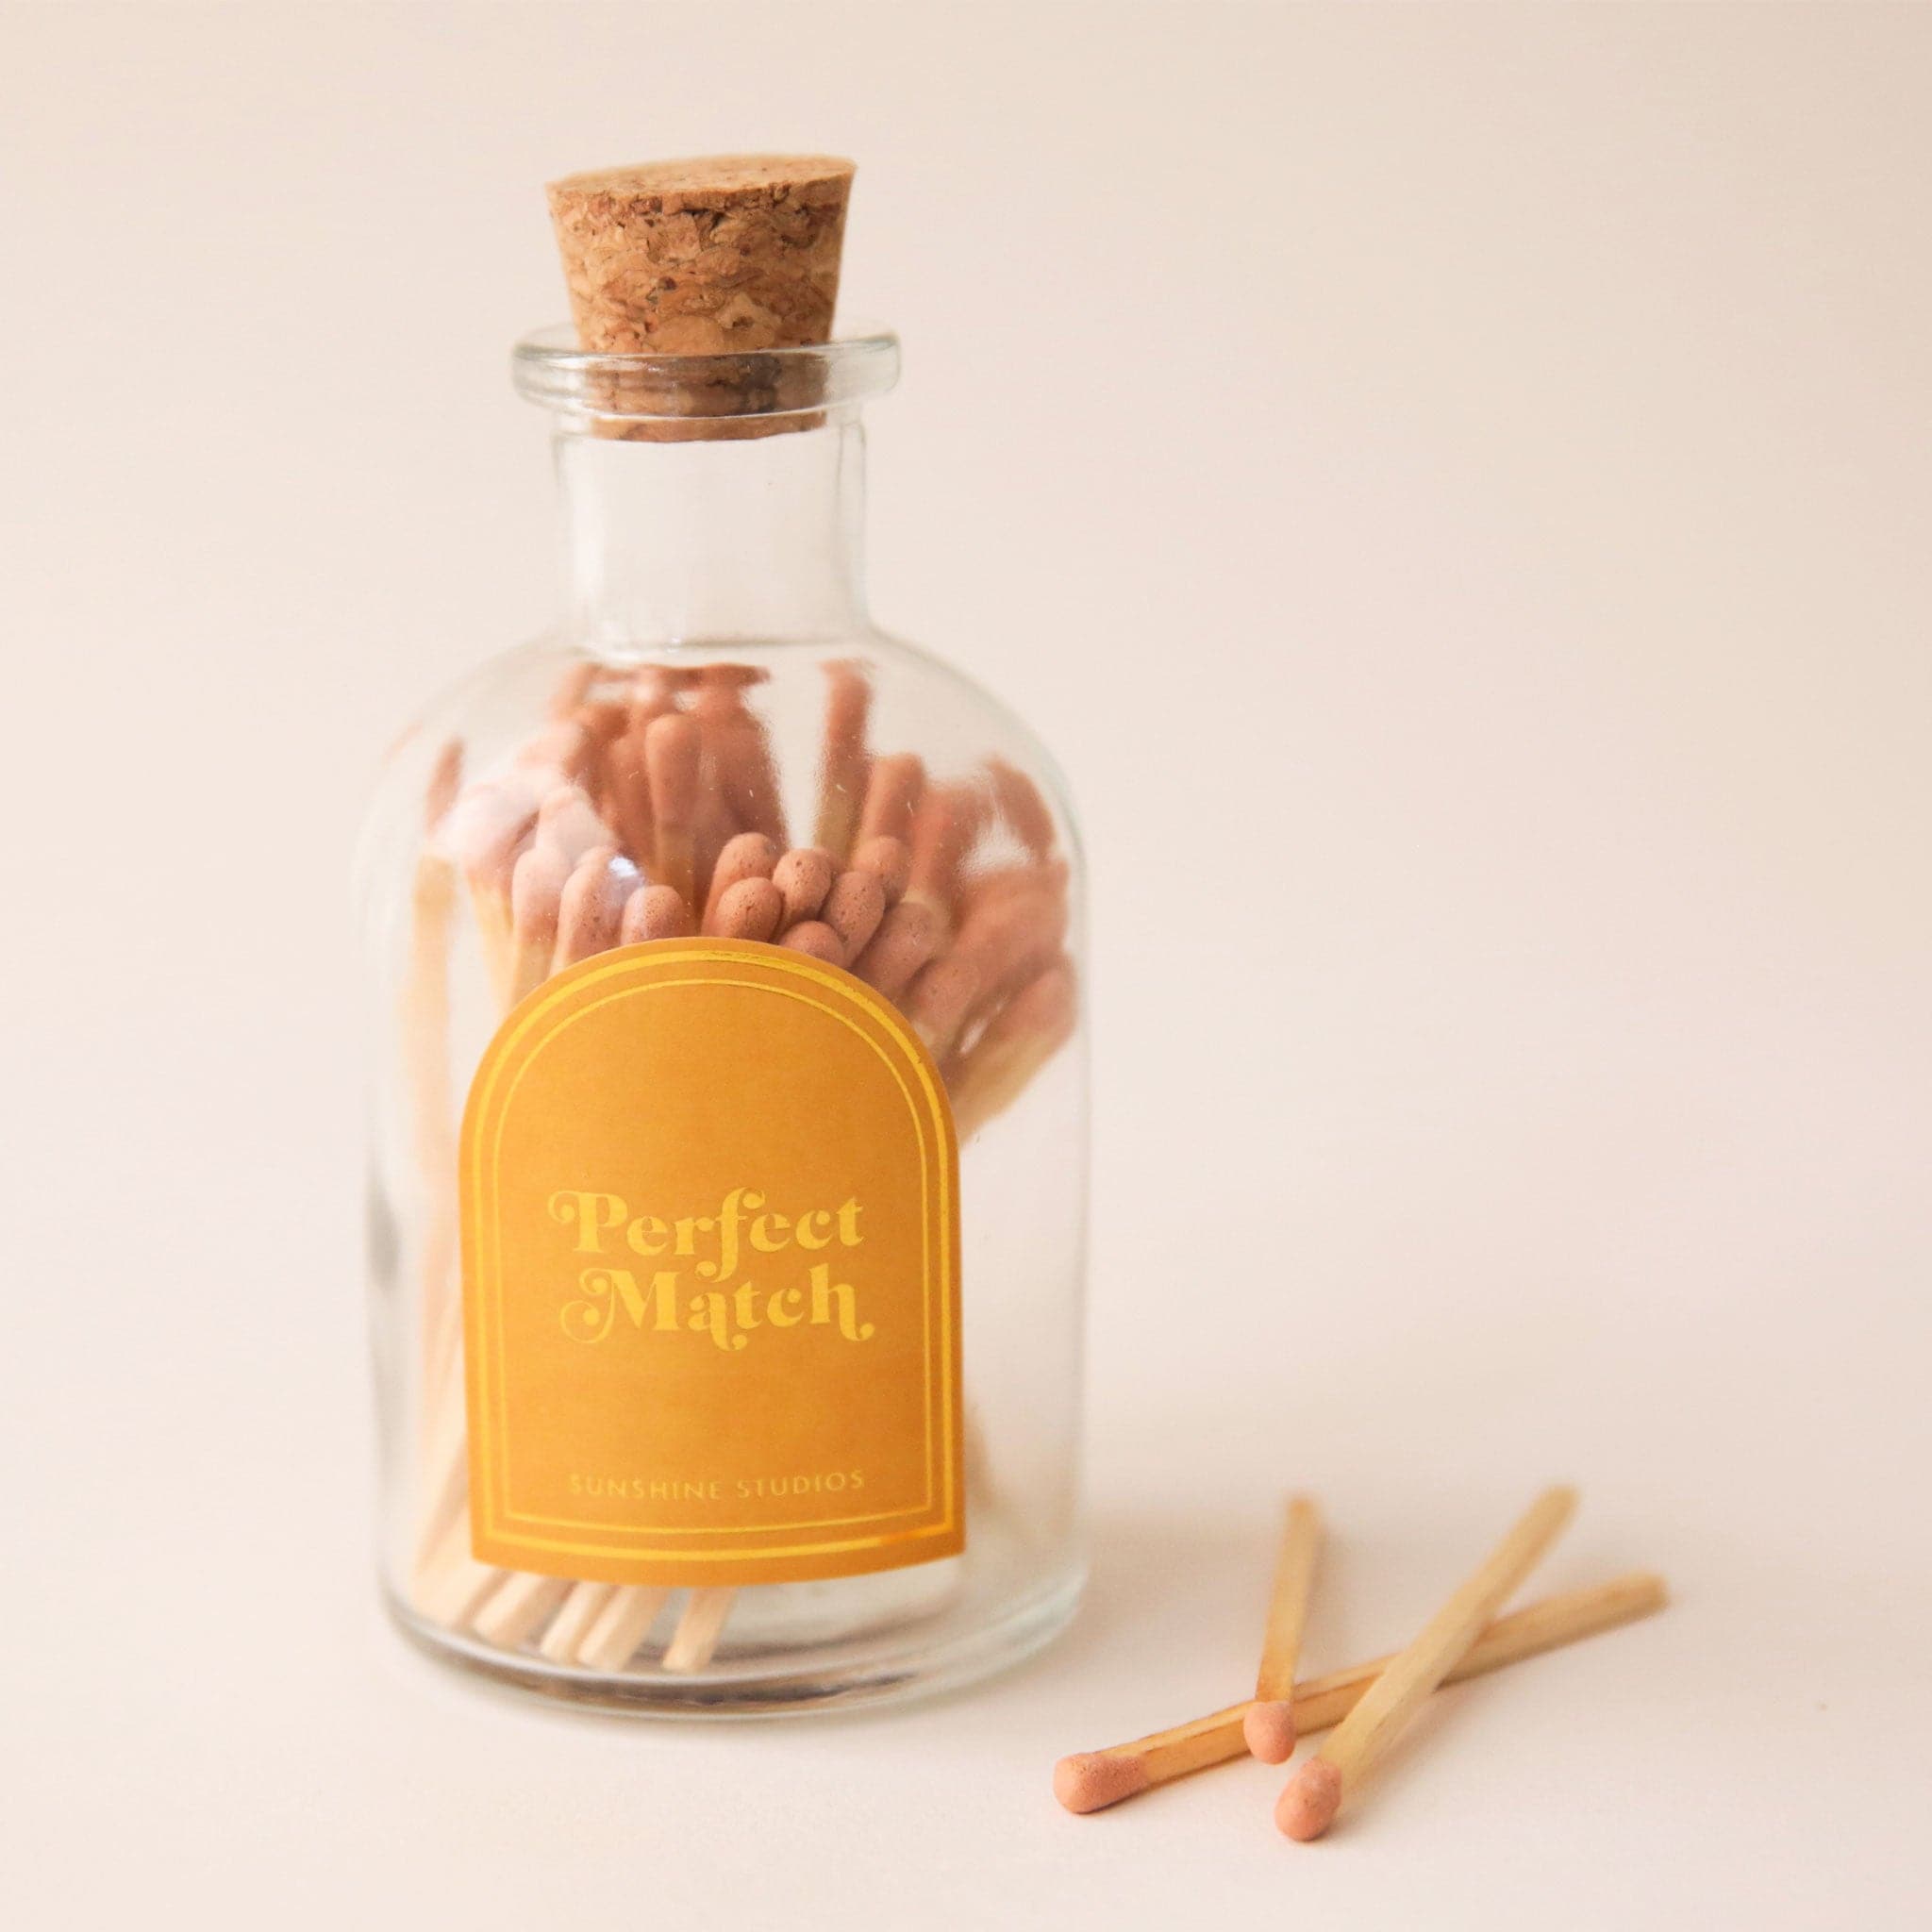 A glass jar of matches with a gold arched label and a cork cap.